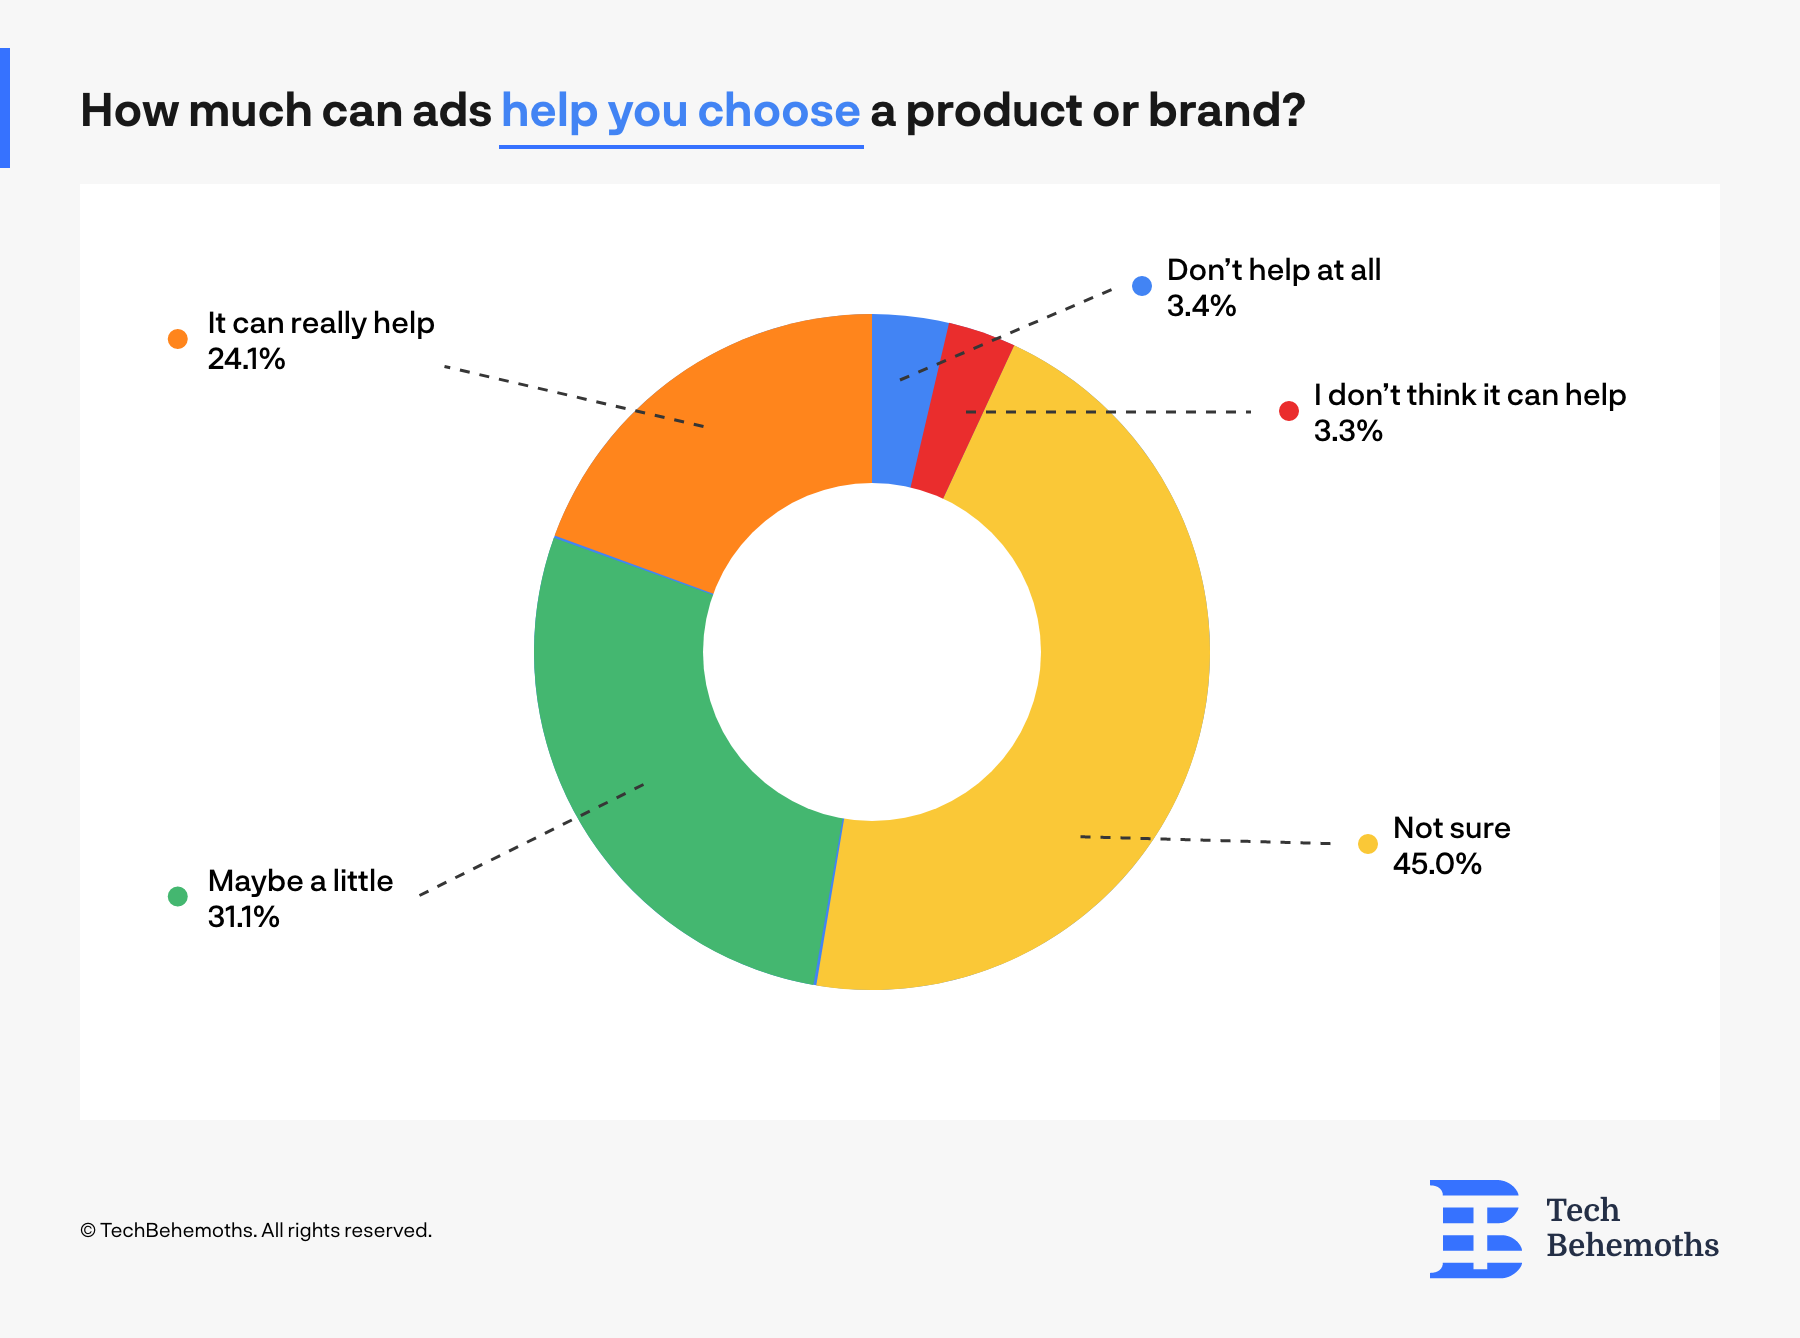 How much ads help users chose a brand